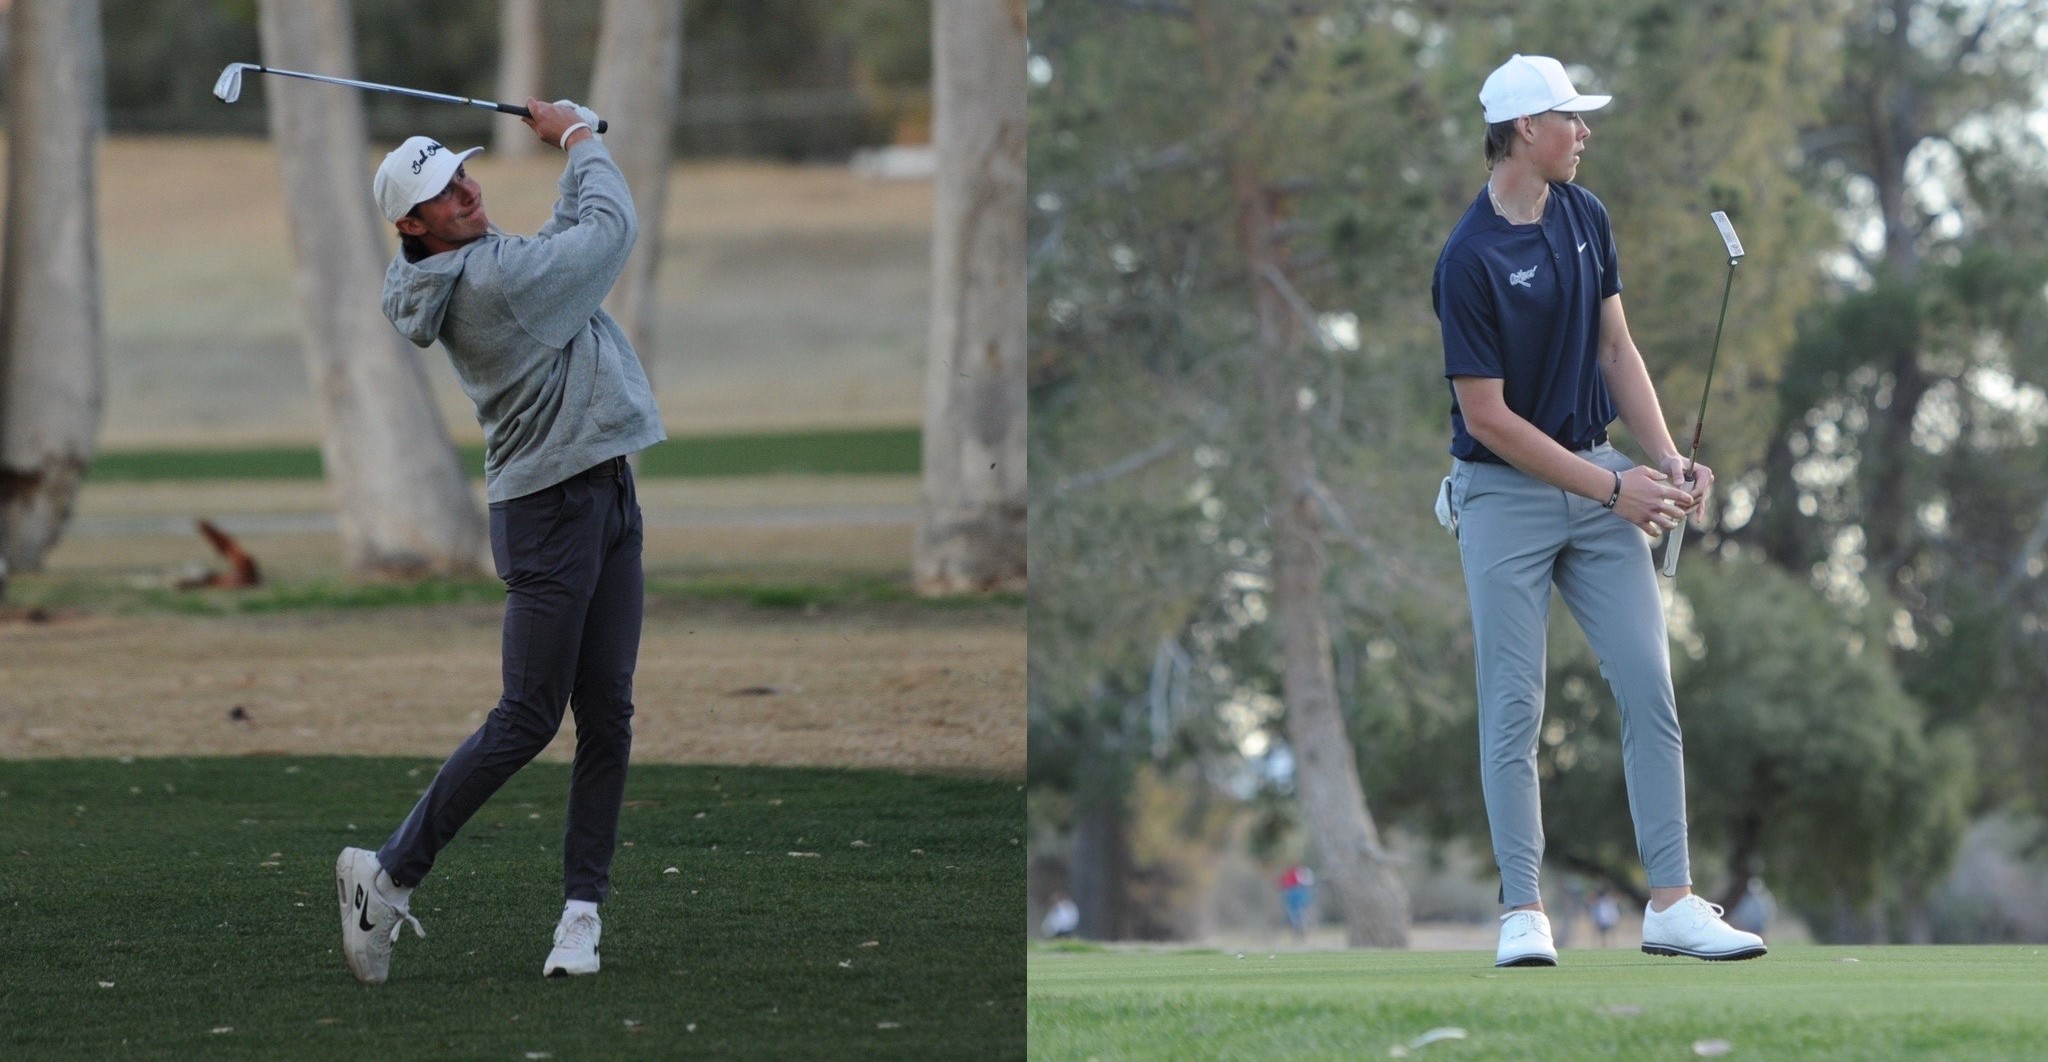 Sophomore Jay Shero, competing as an individual, claimed the Pima Invitational title after he shot a 6-under 138 (70-68) at the Randolph North Golf Course. Sophomore Max Krueger (Salpointe Catholic HS) tied for second place with a score of 141 (71-70). Photos by Ray Suarez